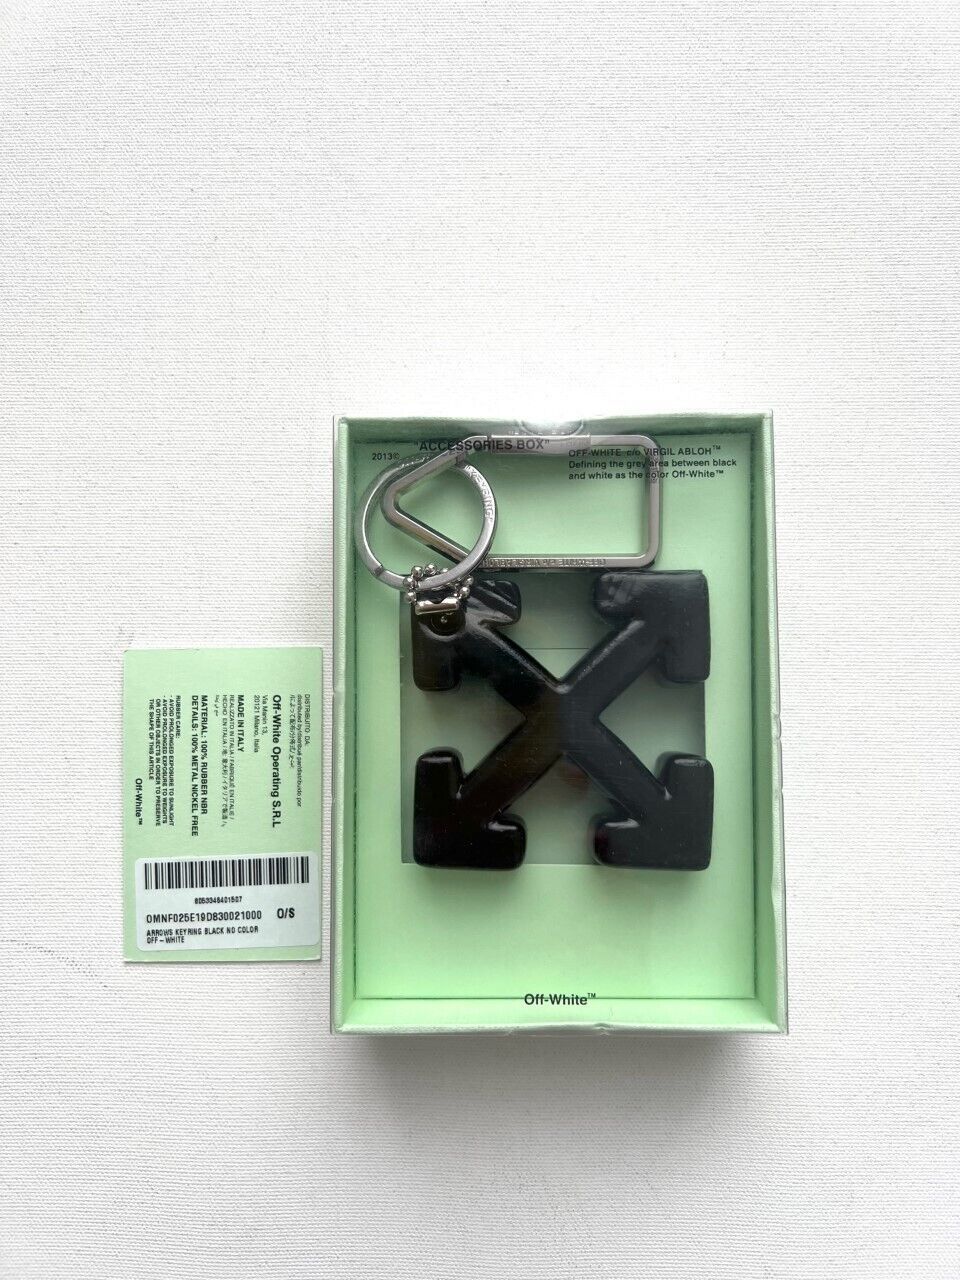 Louis Vuitton Animal Key Chains, Rings & Finders for Women for